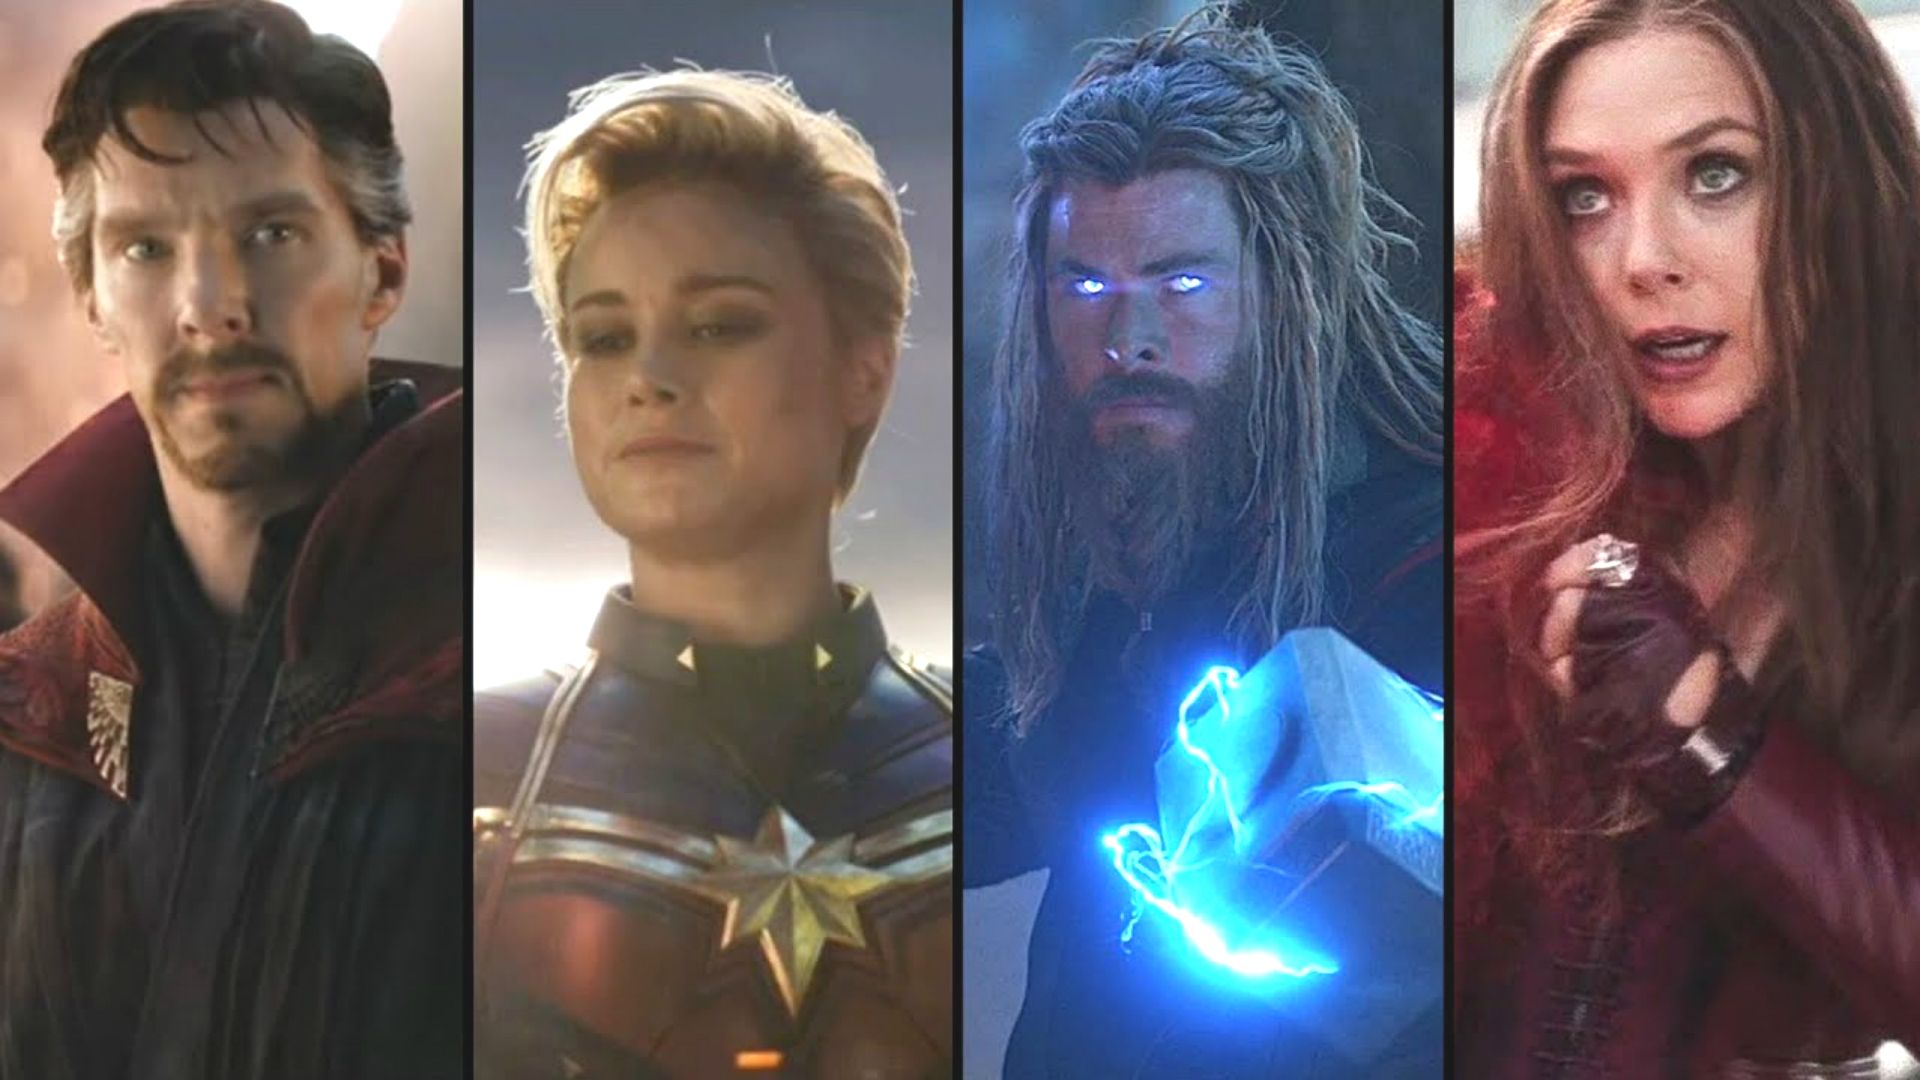 10 most Powerful Avengers in the MCU, ranked